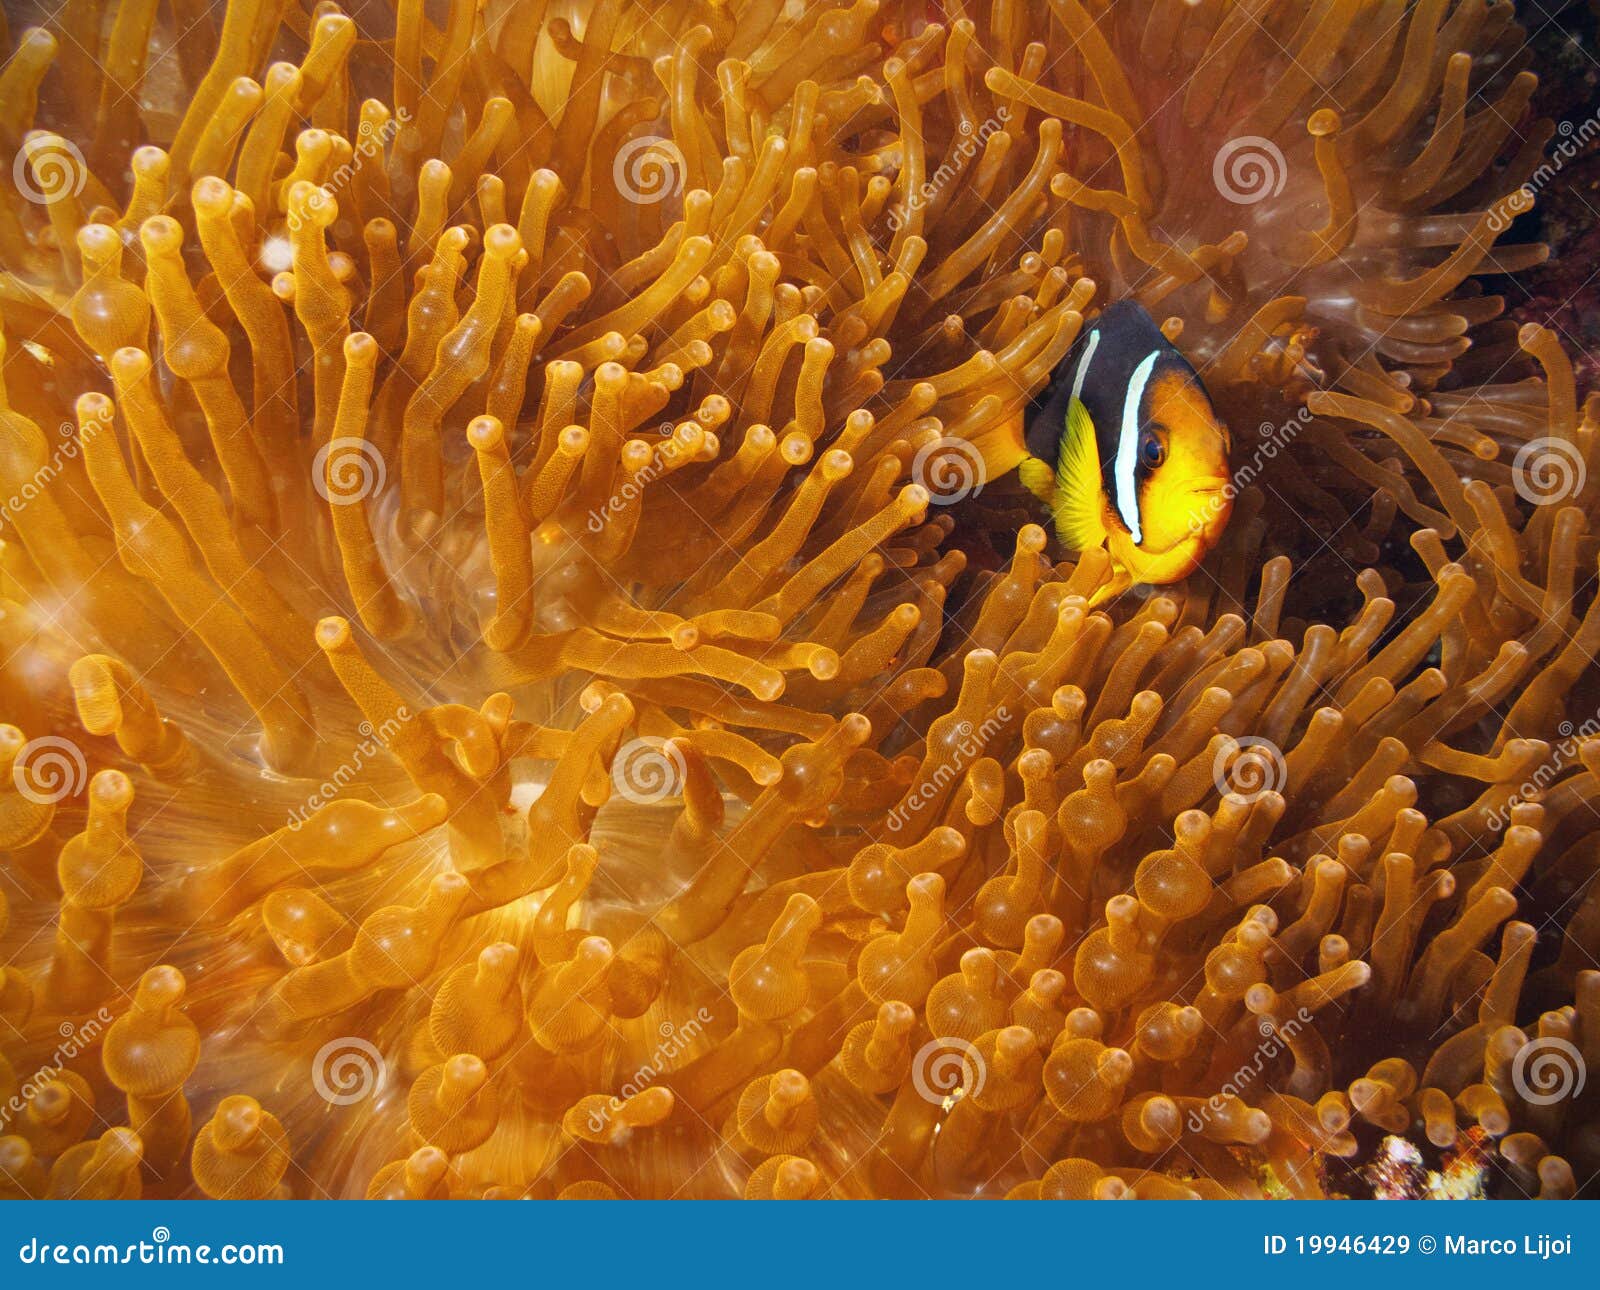 clown fish with red anemone